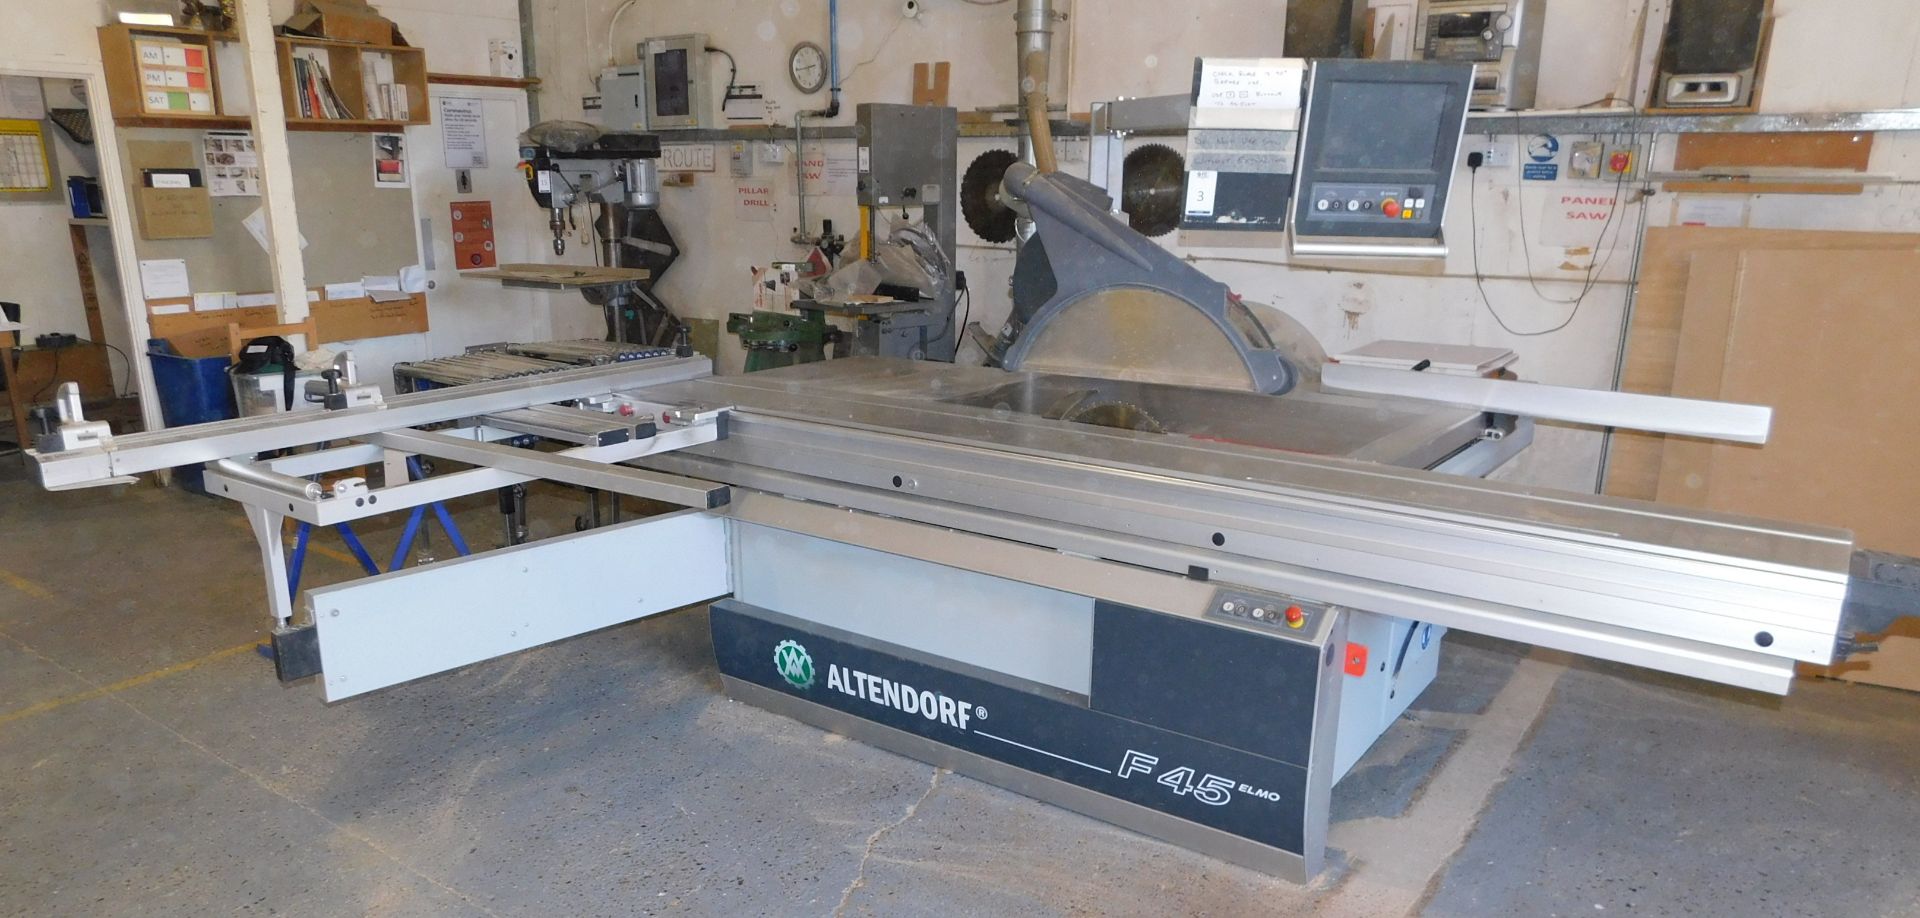 Altendorf F45 Elmo III Sliding Table Saw (2012) Serial Number 12-07-10-056 With Rise/Fall & Tilt - Image 2 of 11